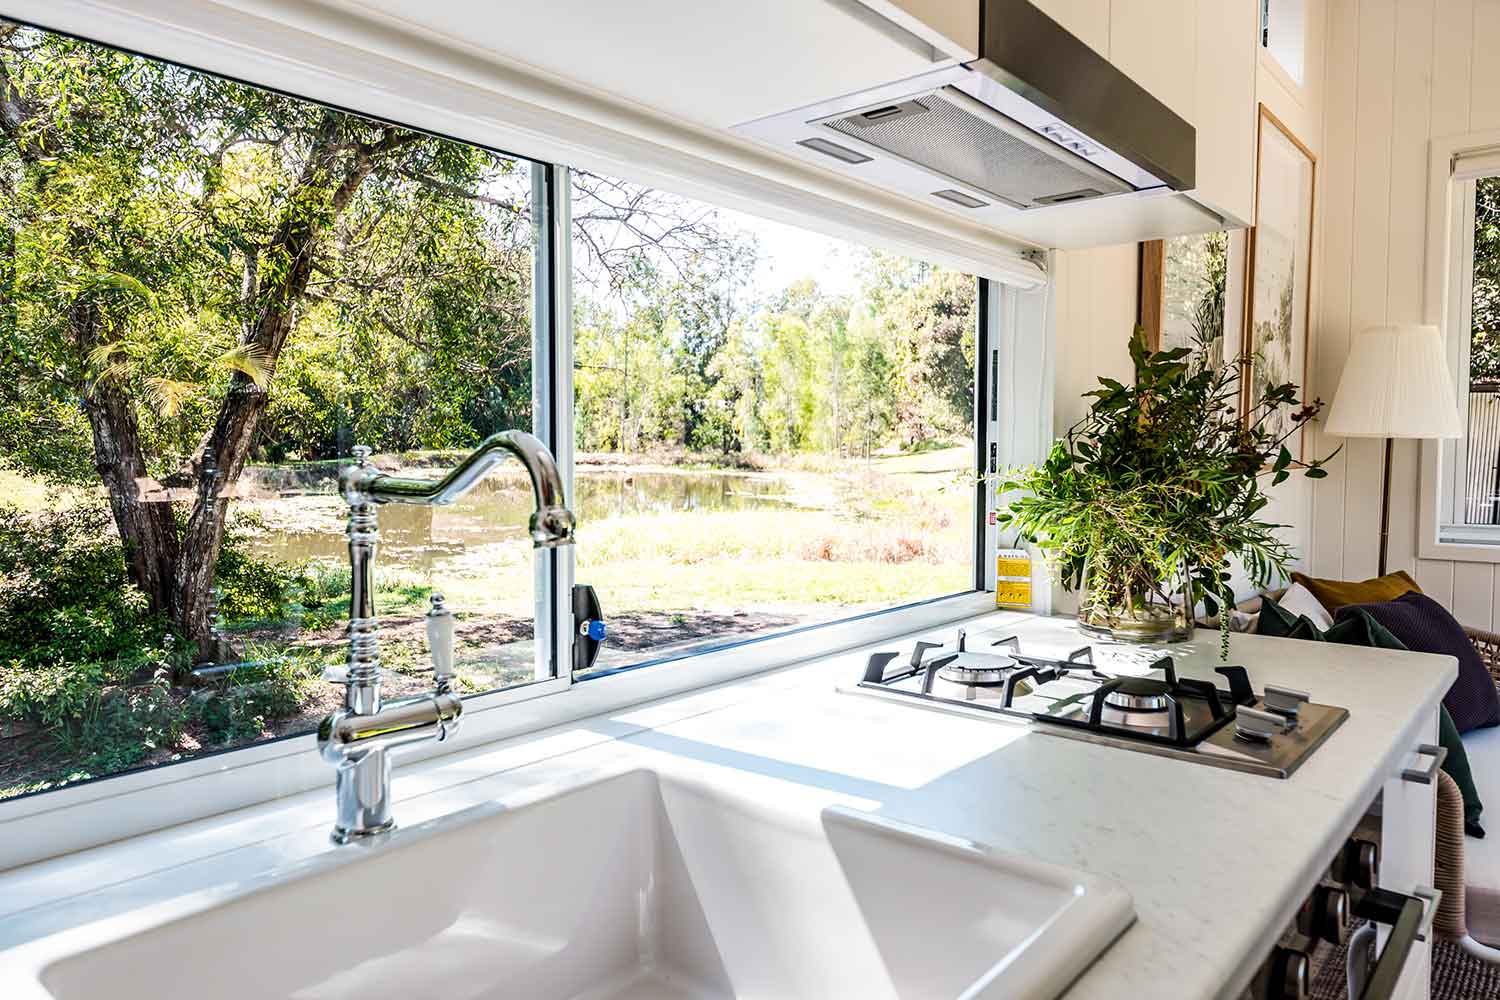 Kitchen Sink - Casuarina 9.0 by Aussie Tiny Houses